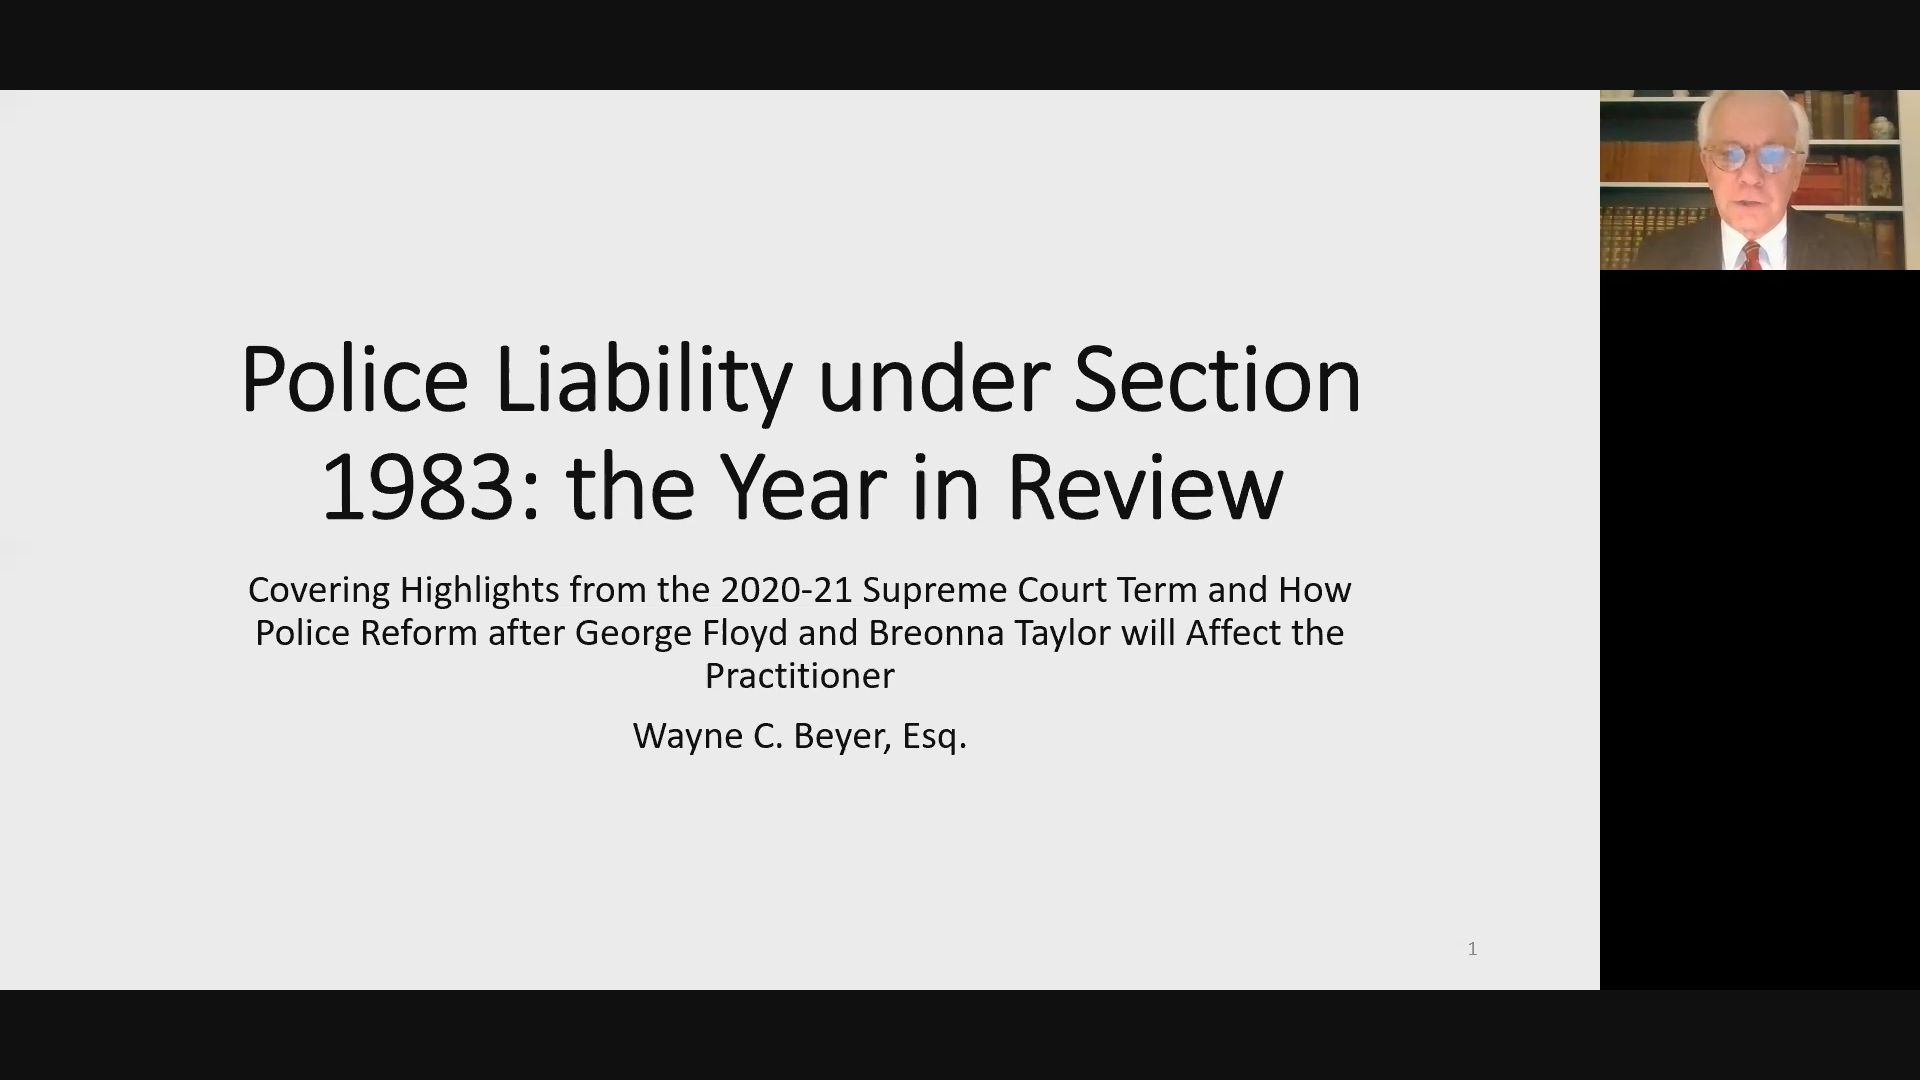 Policing under Section 1983: The Year in Review Thumbnail